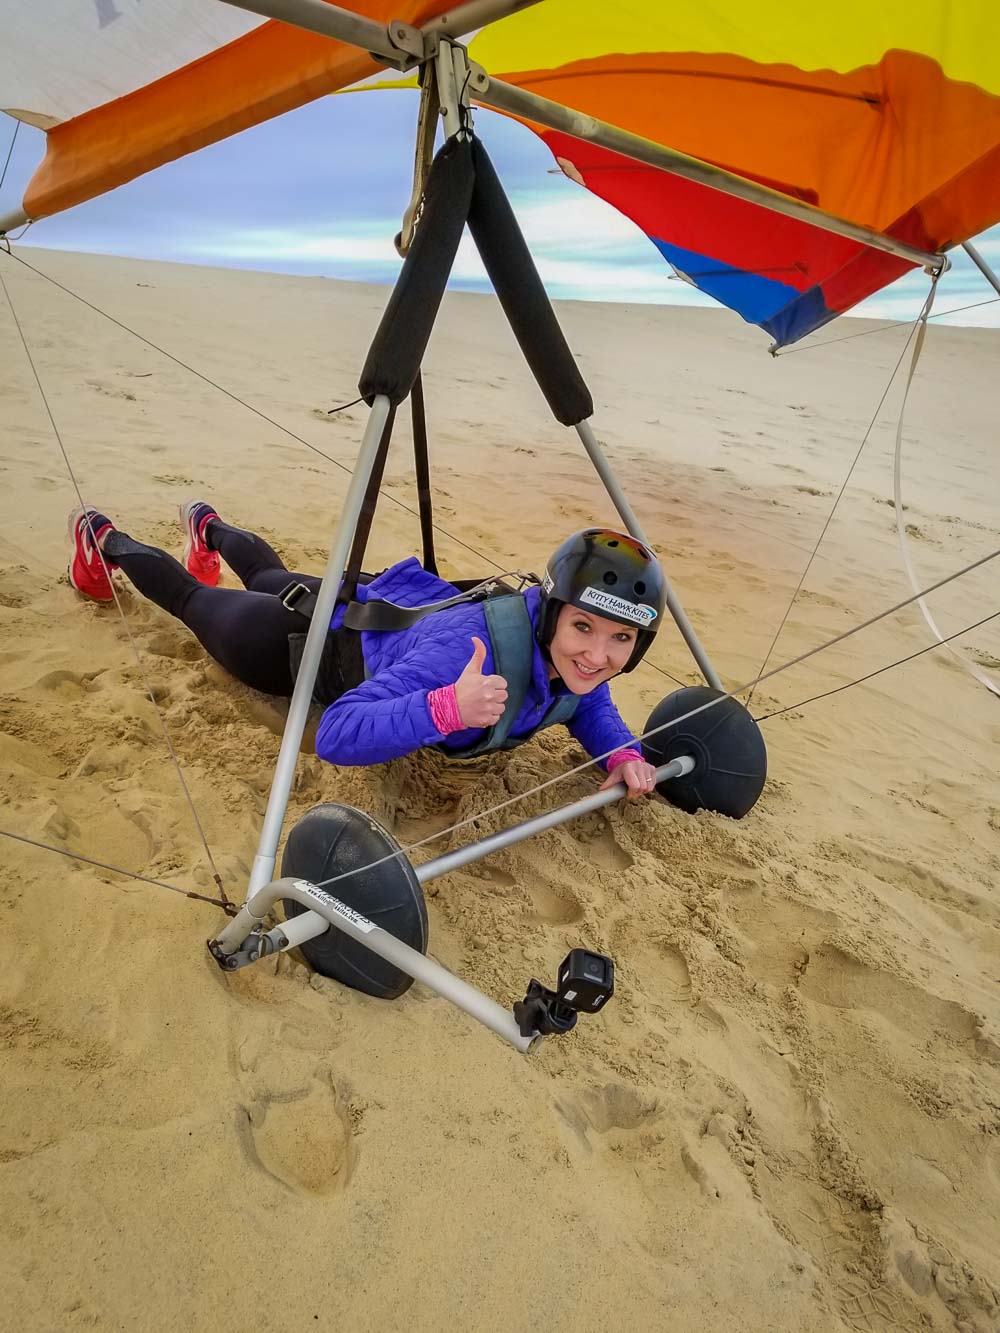 Weekend Adventures - Hang Gliding in the Outer Banks www.casualtravelist.com